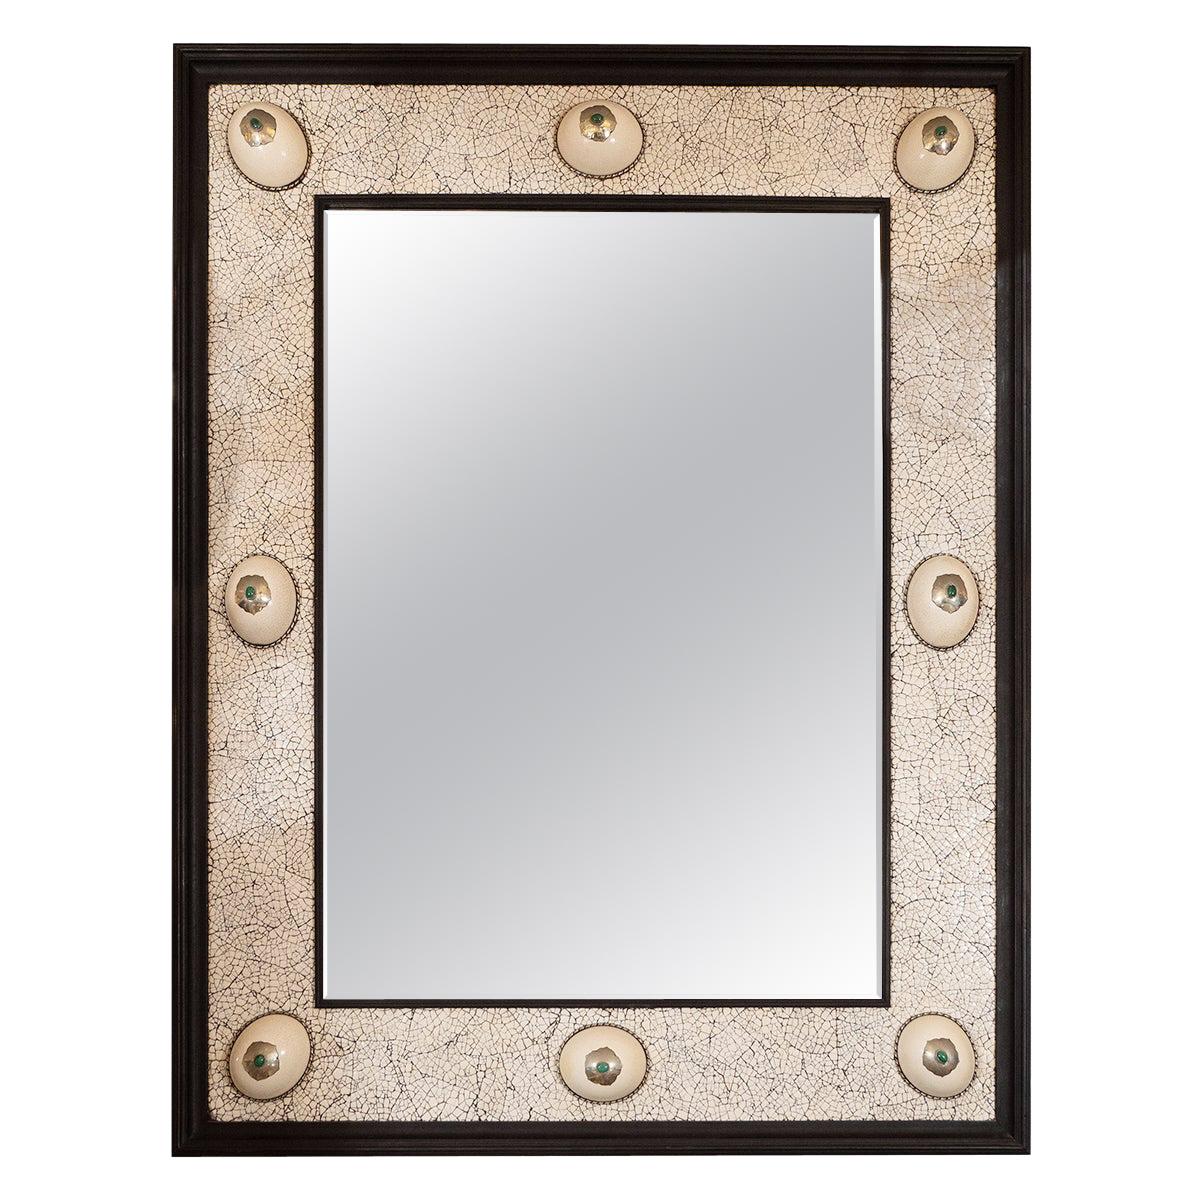 Monumental Mirror with Coquille D'oeuf Surround For Sale